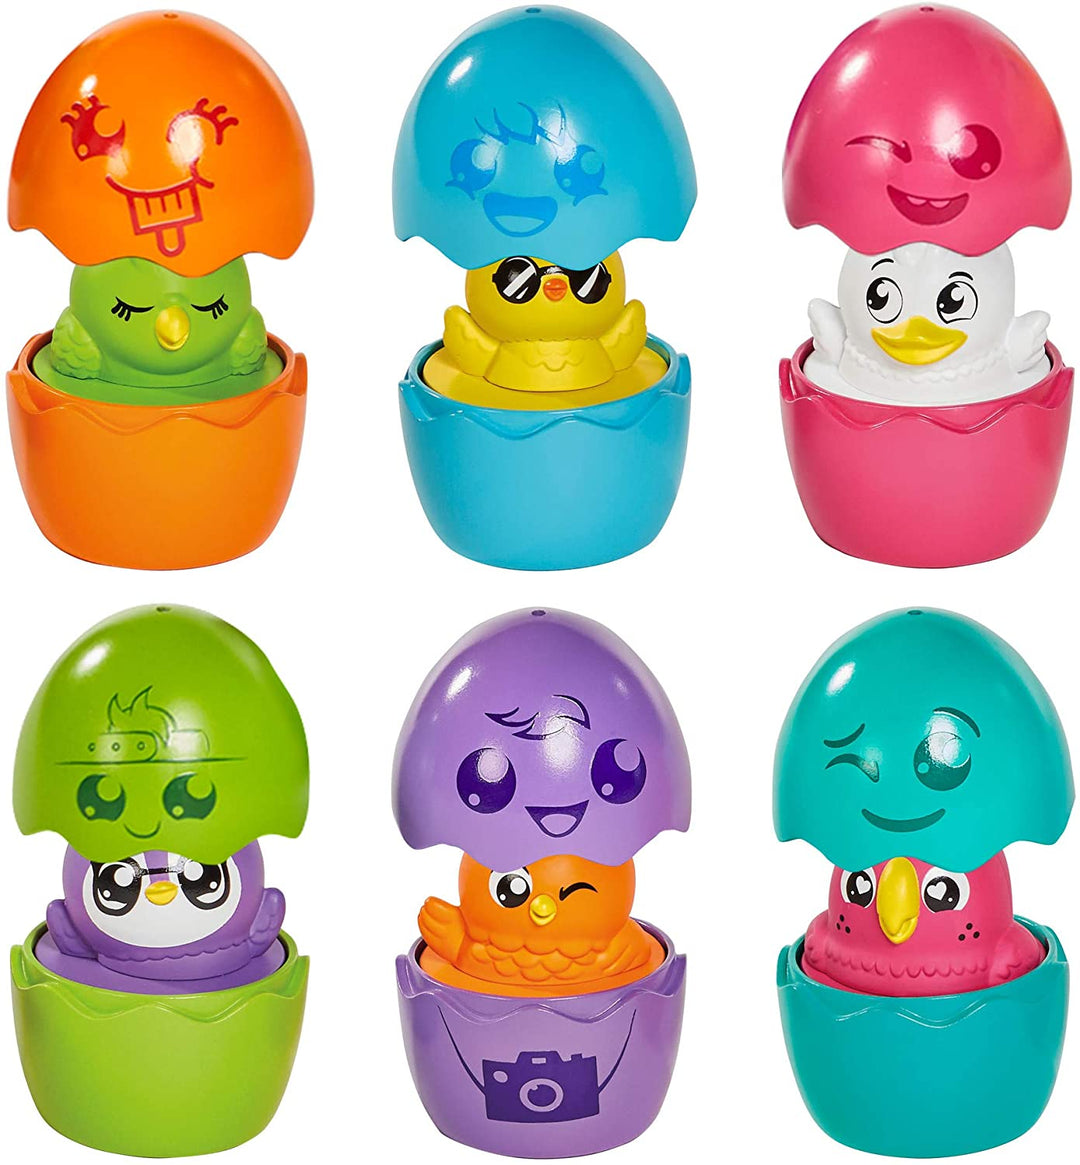 Toomies TOMY Hide and Squeak Egg Bus Baby Toy, Educational Shape Sorter with Colours and Sound, Easter Toy for Babies, Baby Push-Along Toy for Toddlers, Baby Boys & Girls Aged 1, 2 & 3 Year Olds